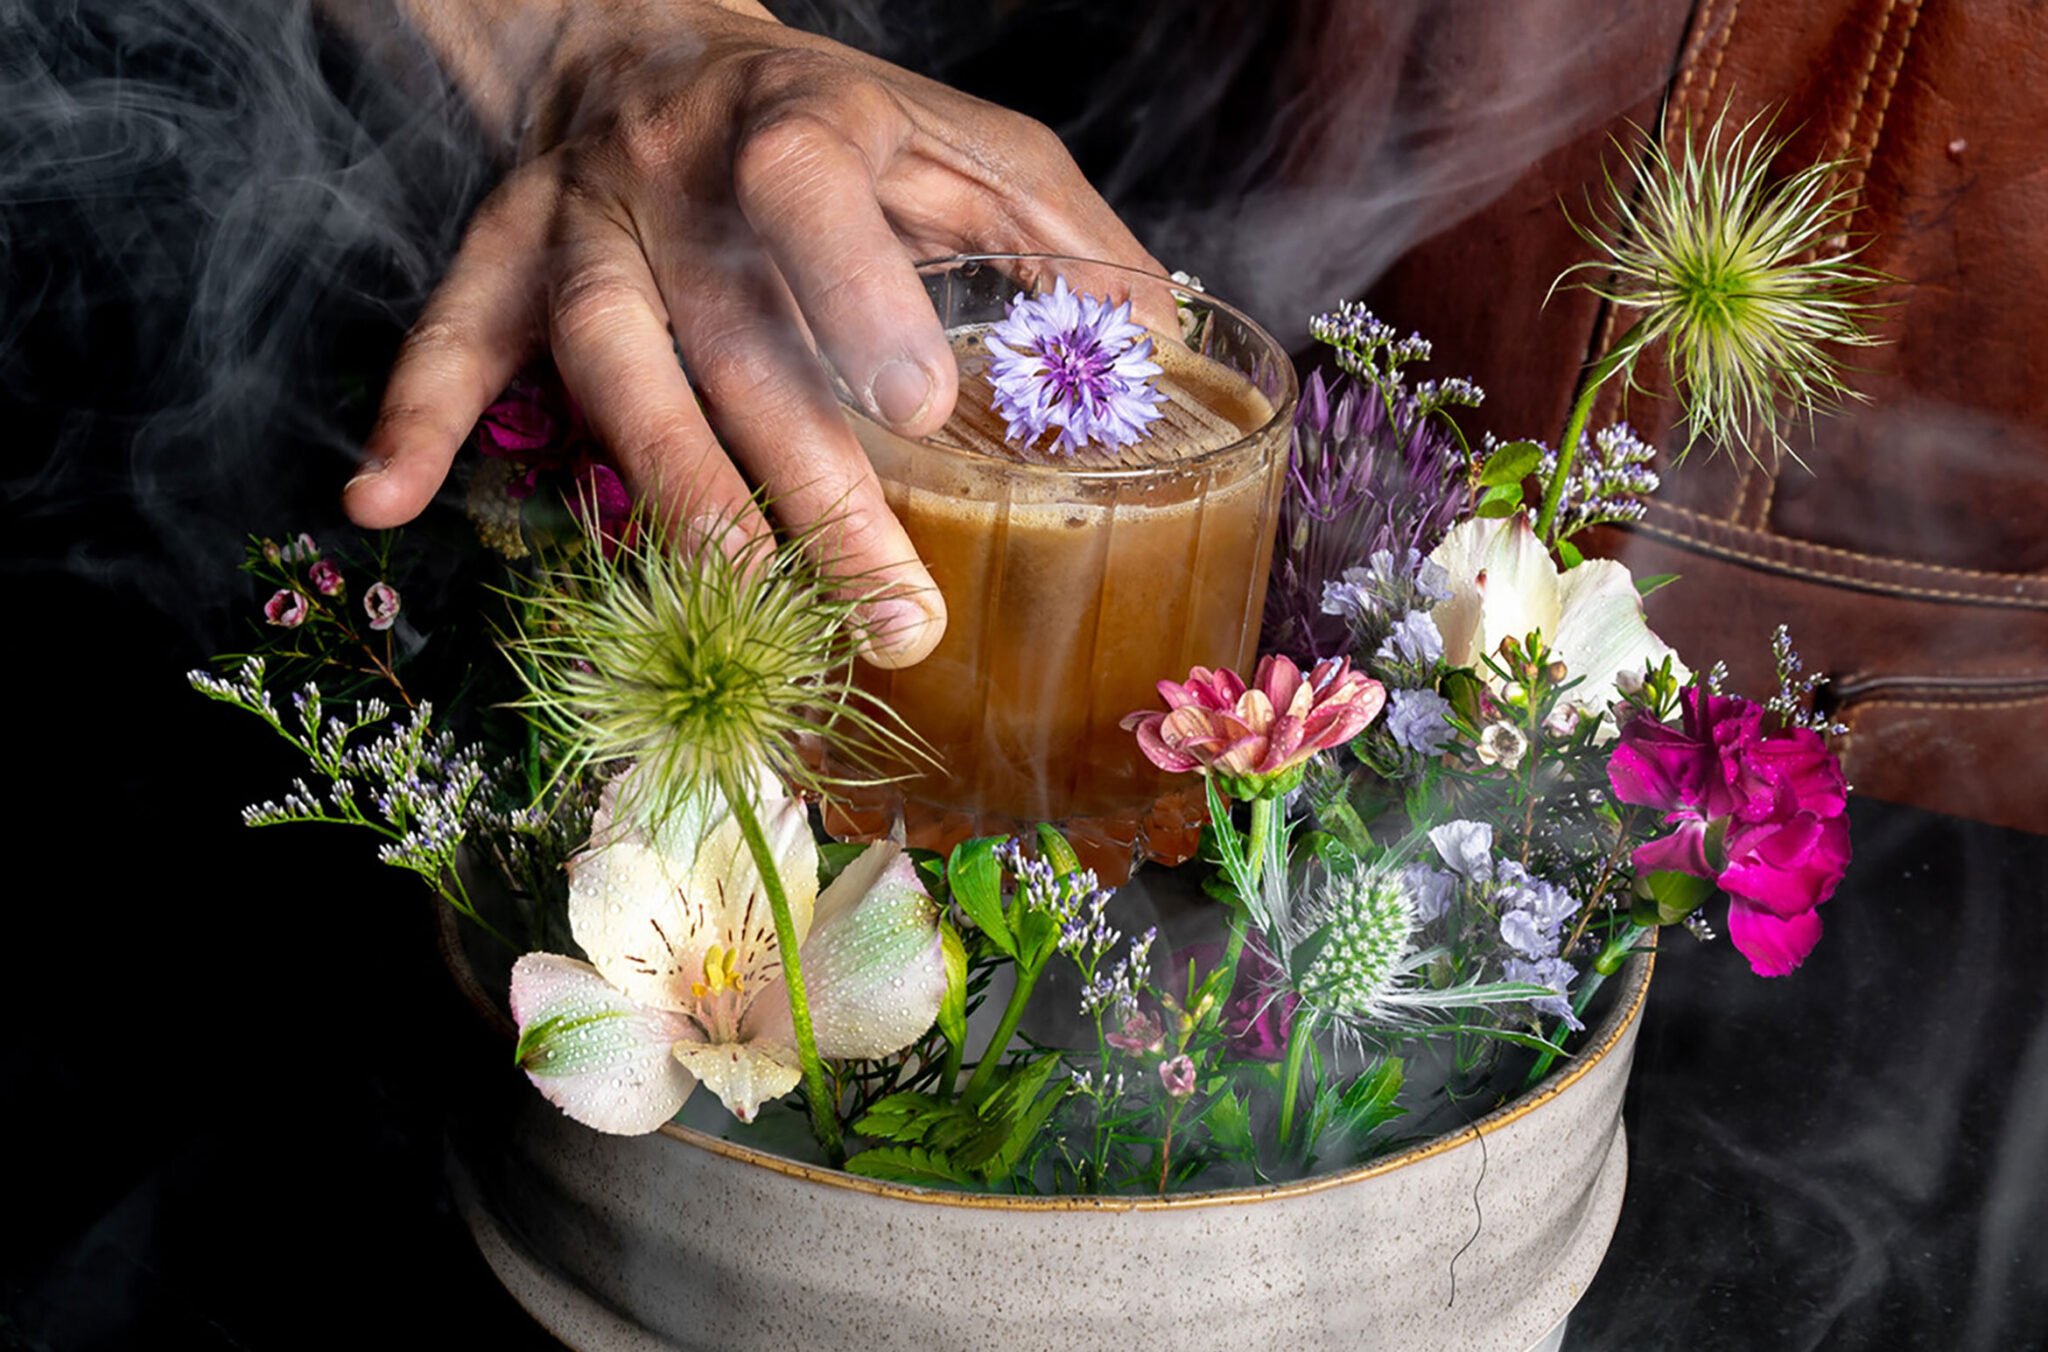 The Bruce's Garden cocktail at the Four Seasons's Braidwood Tavern comes surrounded by flowers.